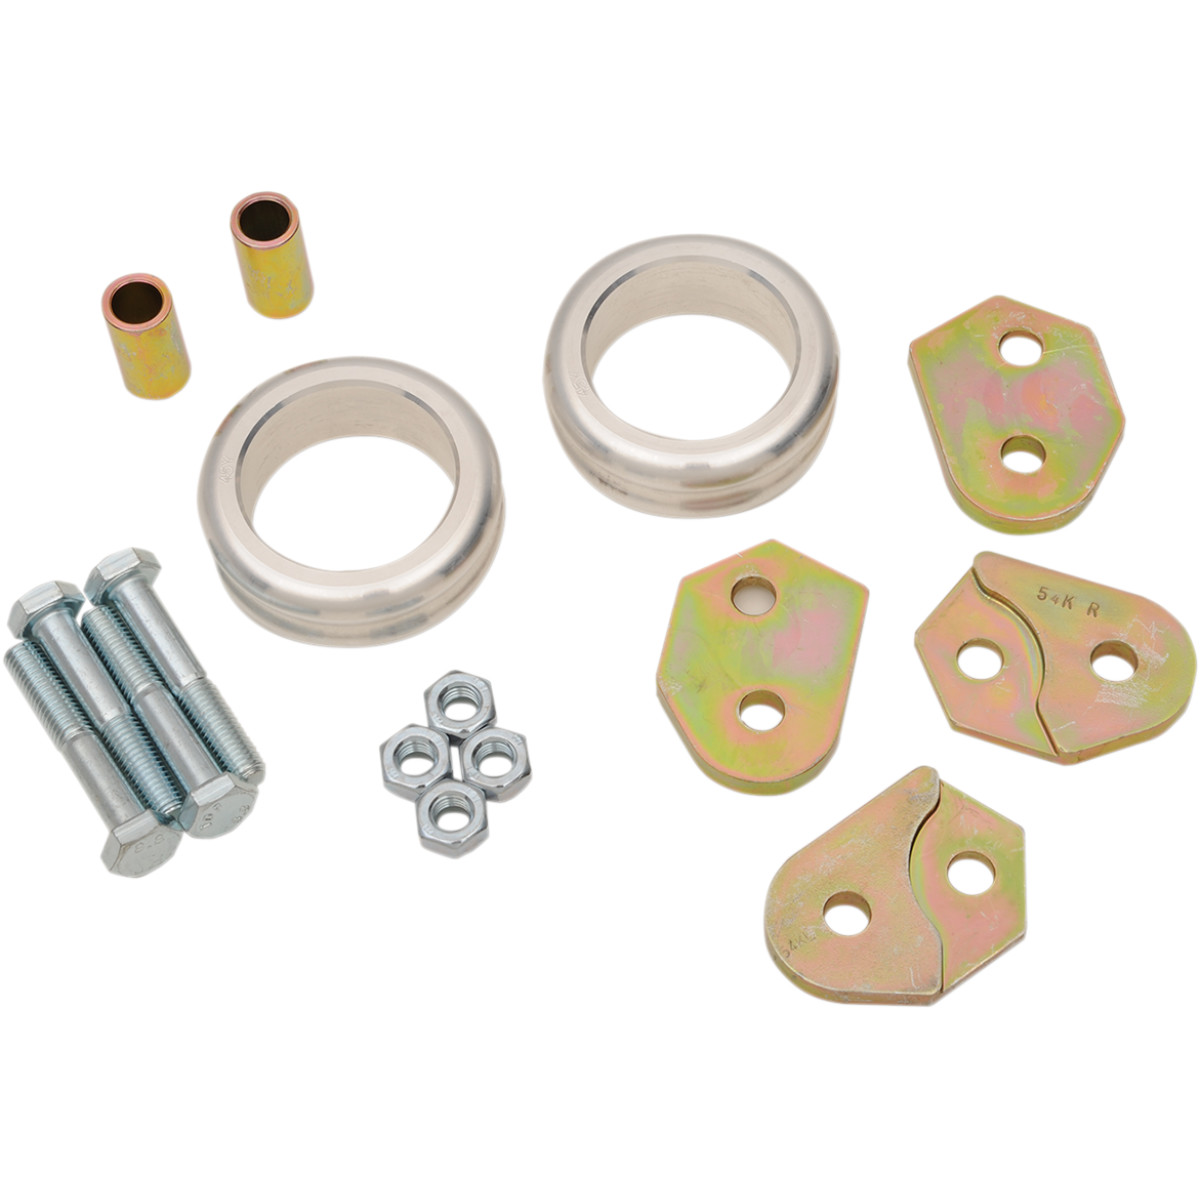 Kit rehausse suspension 1,5" MOOSE - Can-am Defender/Traxter -